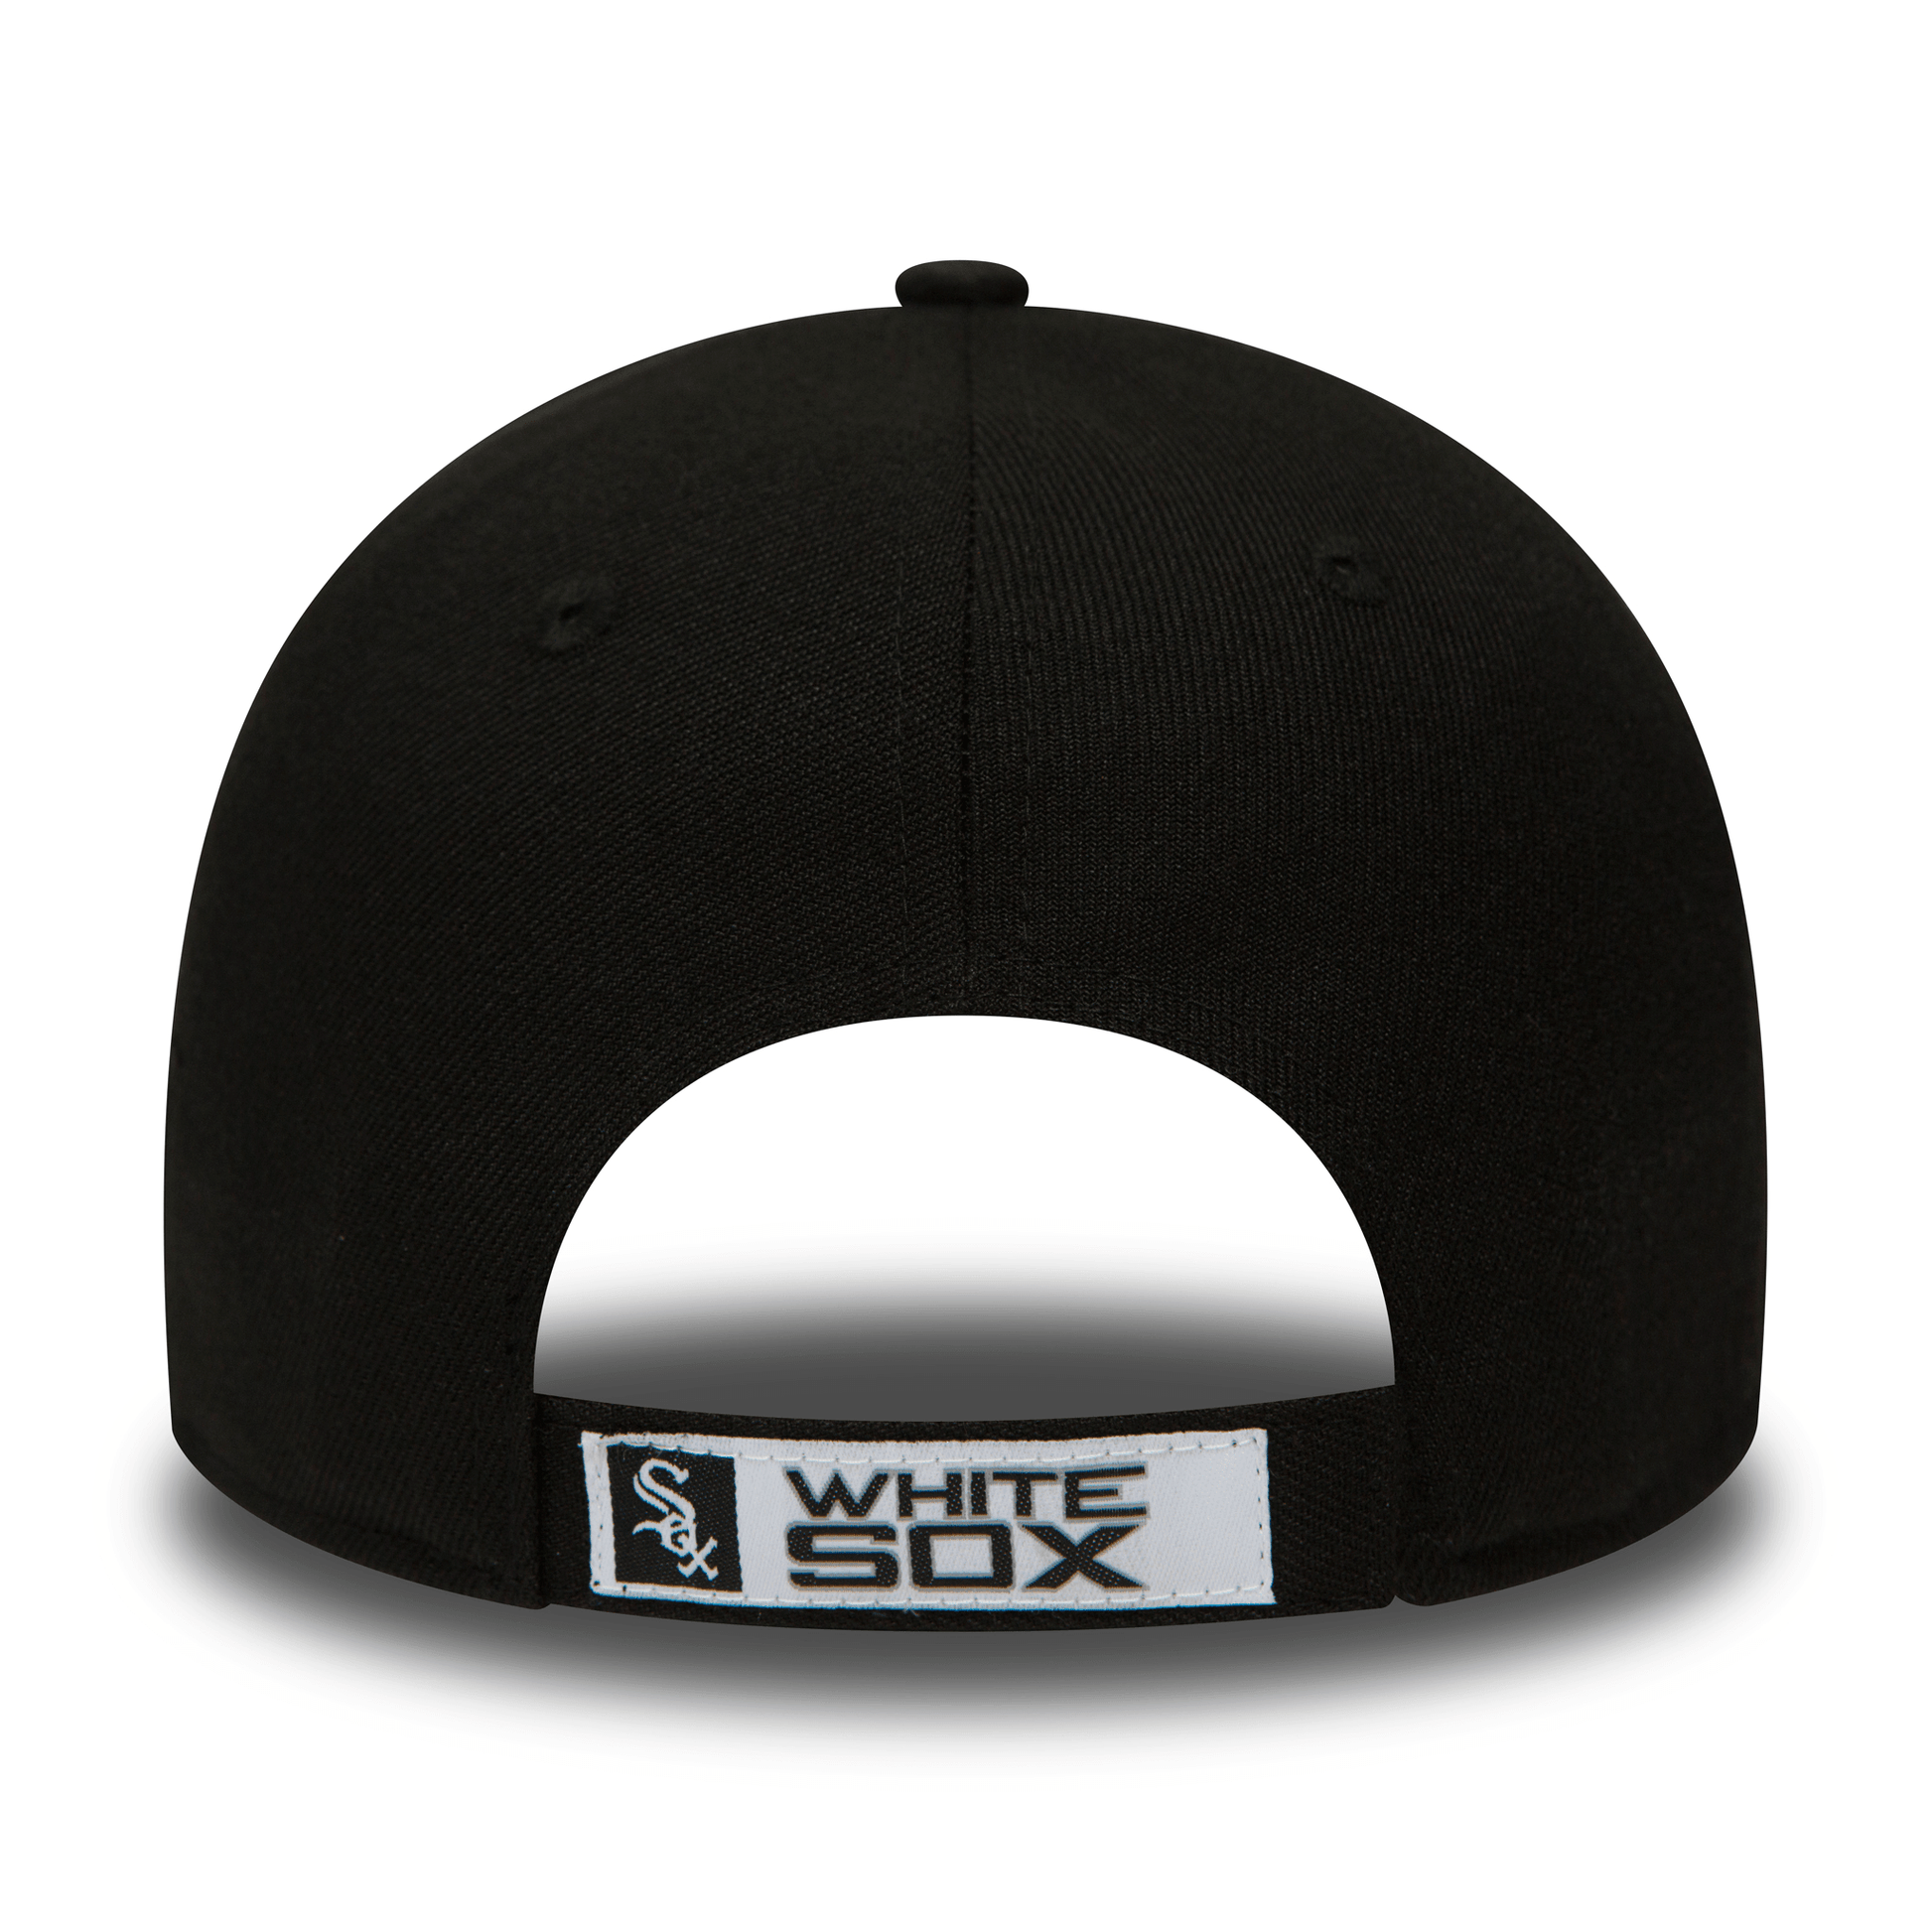 9Forty MLB Chicago White Sox Cap by New Era